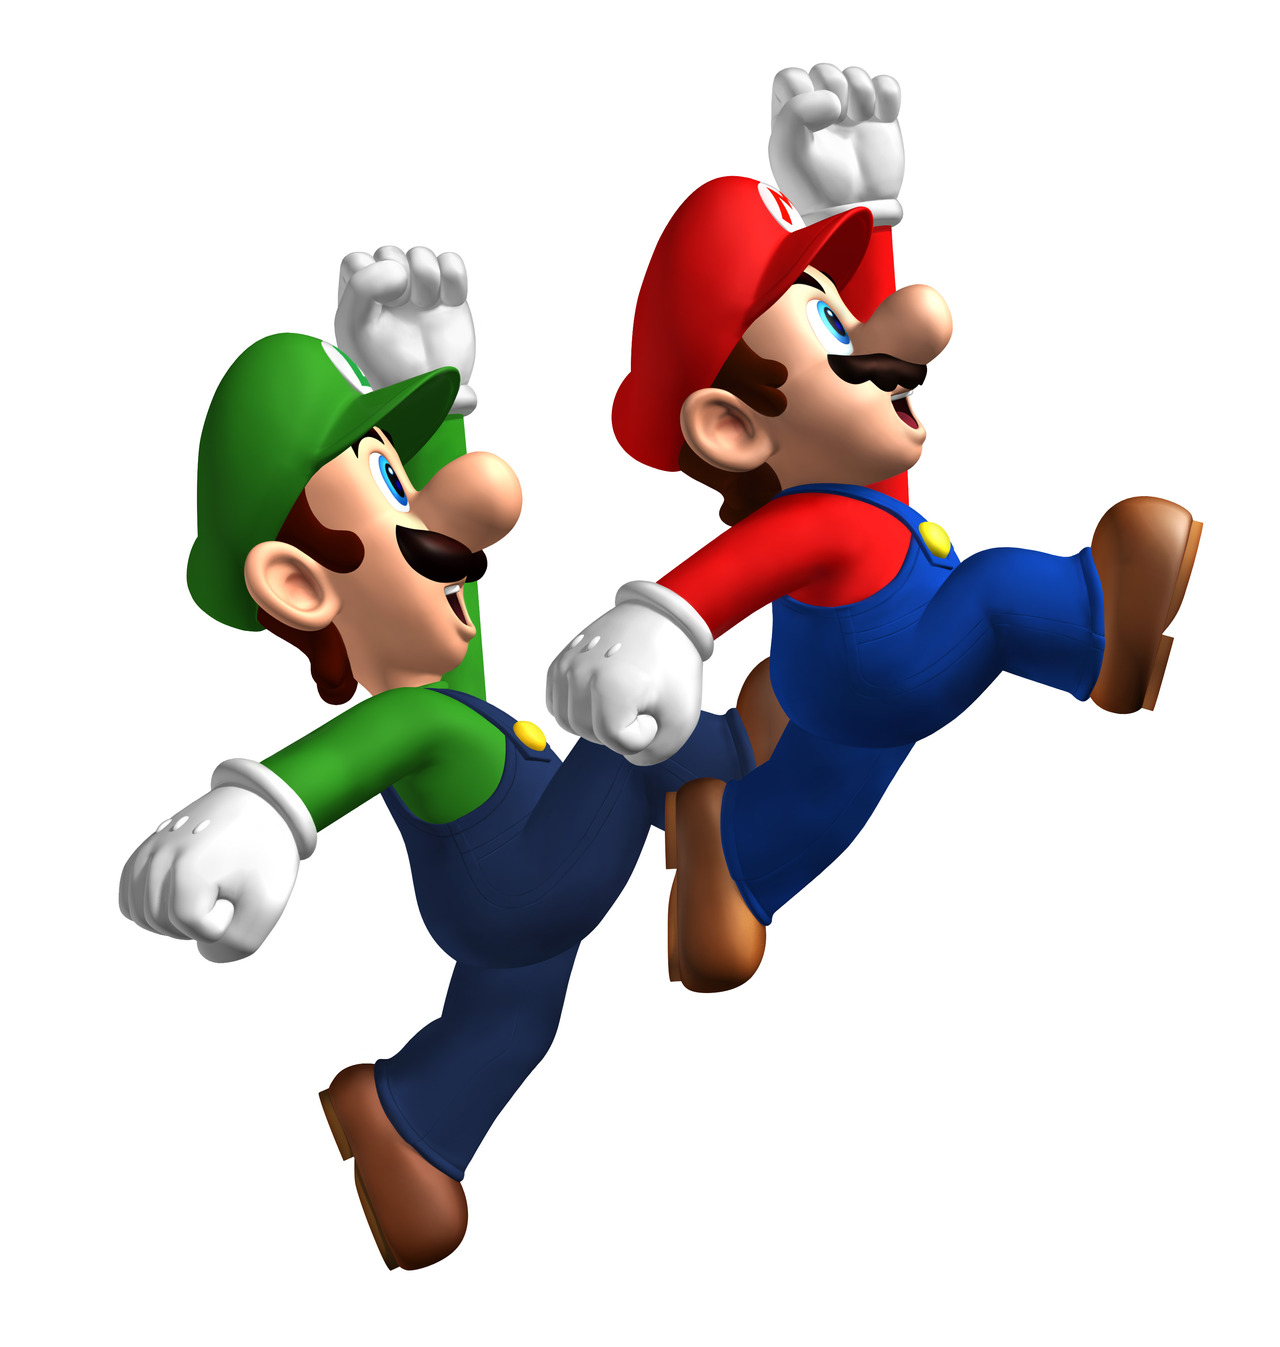 Facts about Mario and Luigi